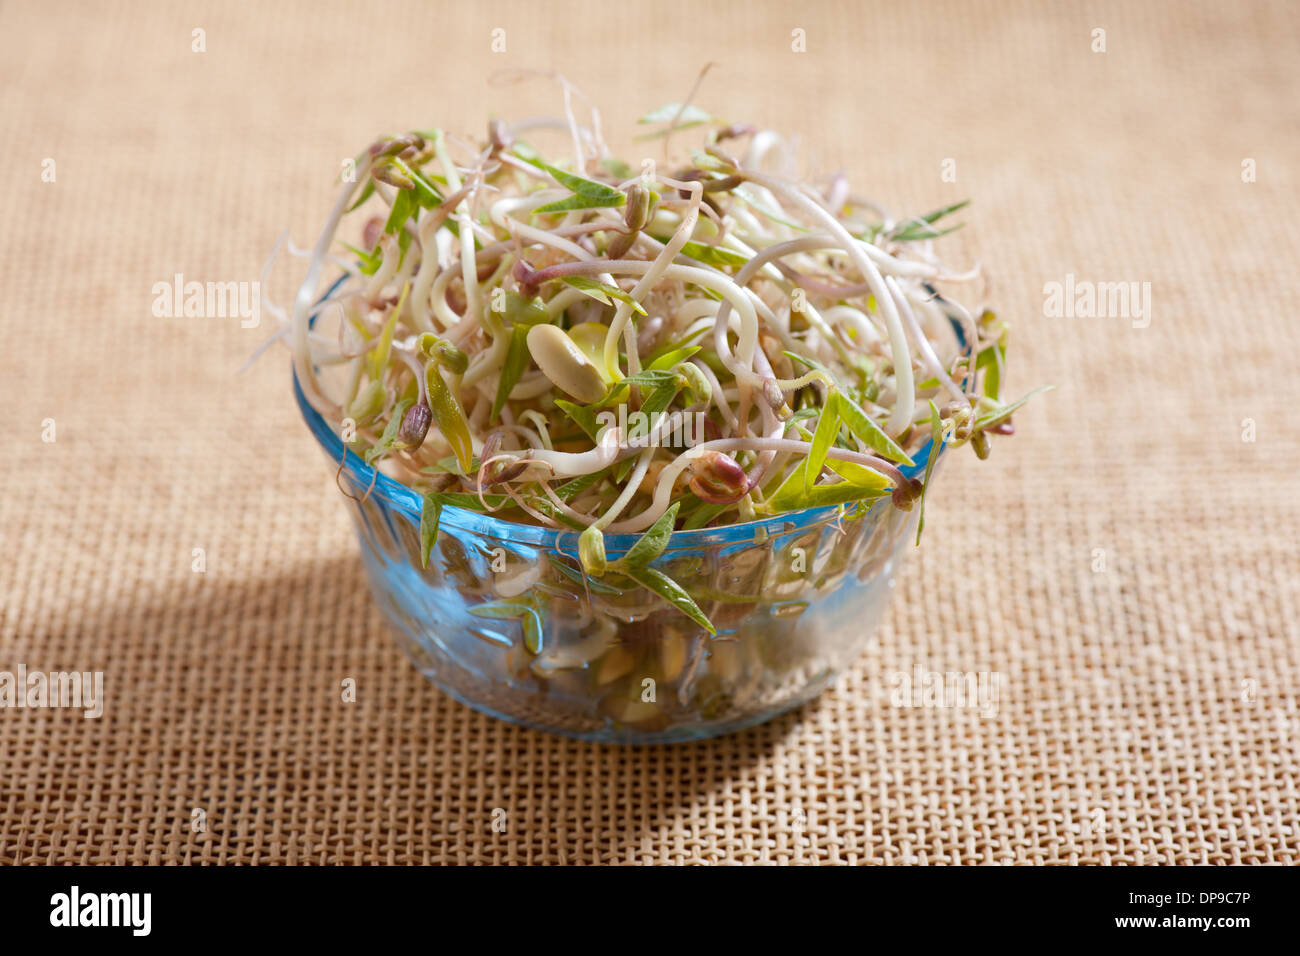 Mix of fresh plant sprouts growing in glass bowl Stock Photo